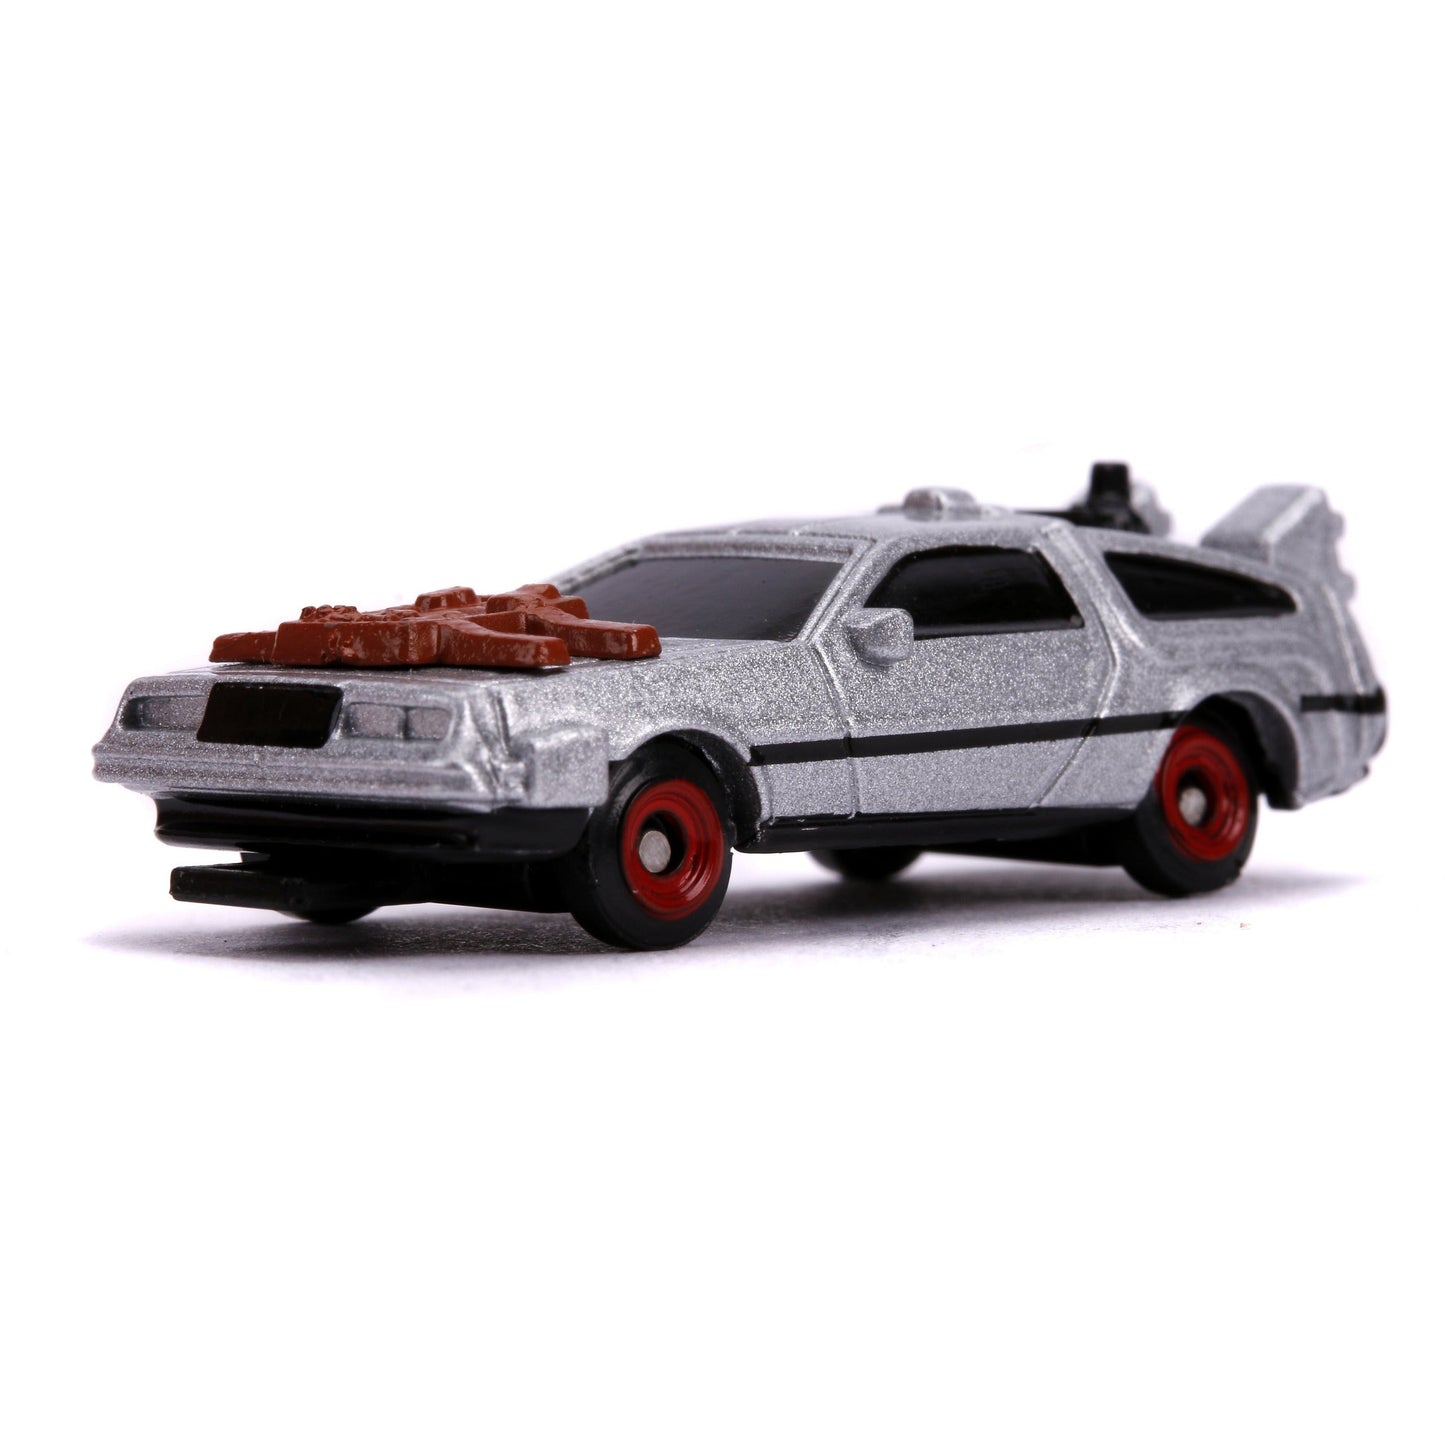 Back to the Future Trilogy die-cast 1⅔-inch Nano "Hollywood Rides" DeLorean Time Machine 3-pack Die-cast Model Cars Jada